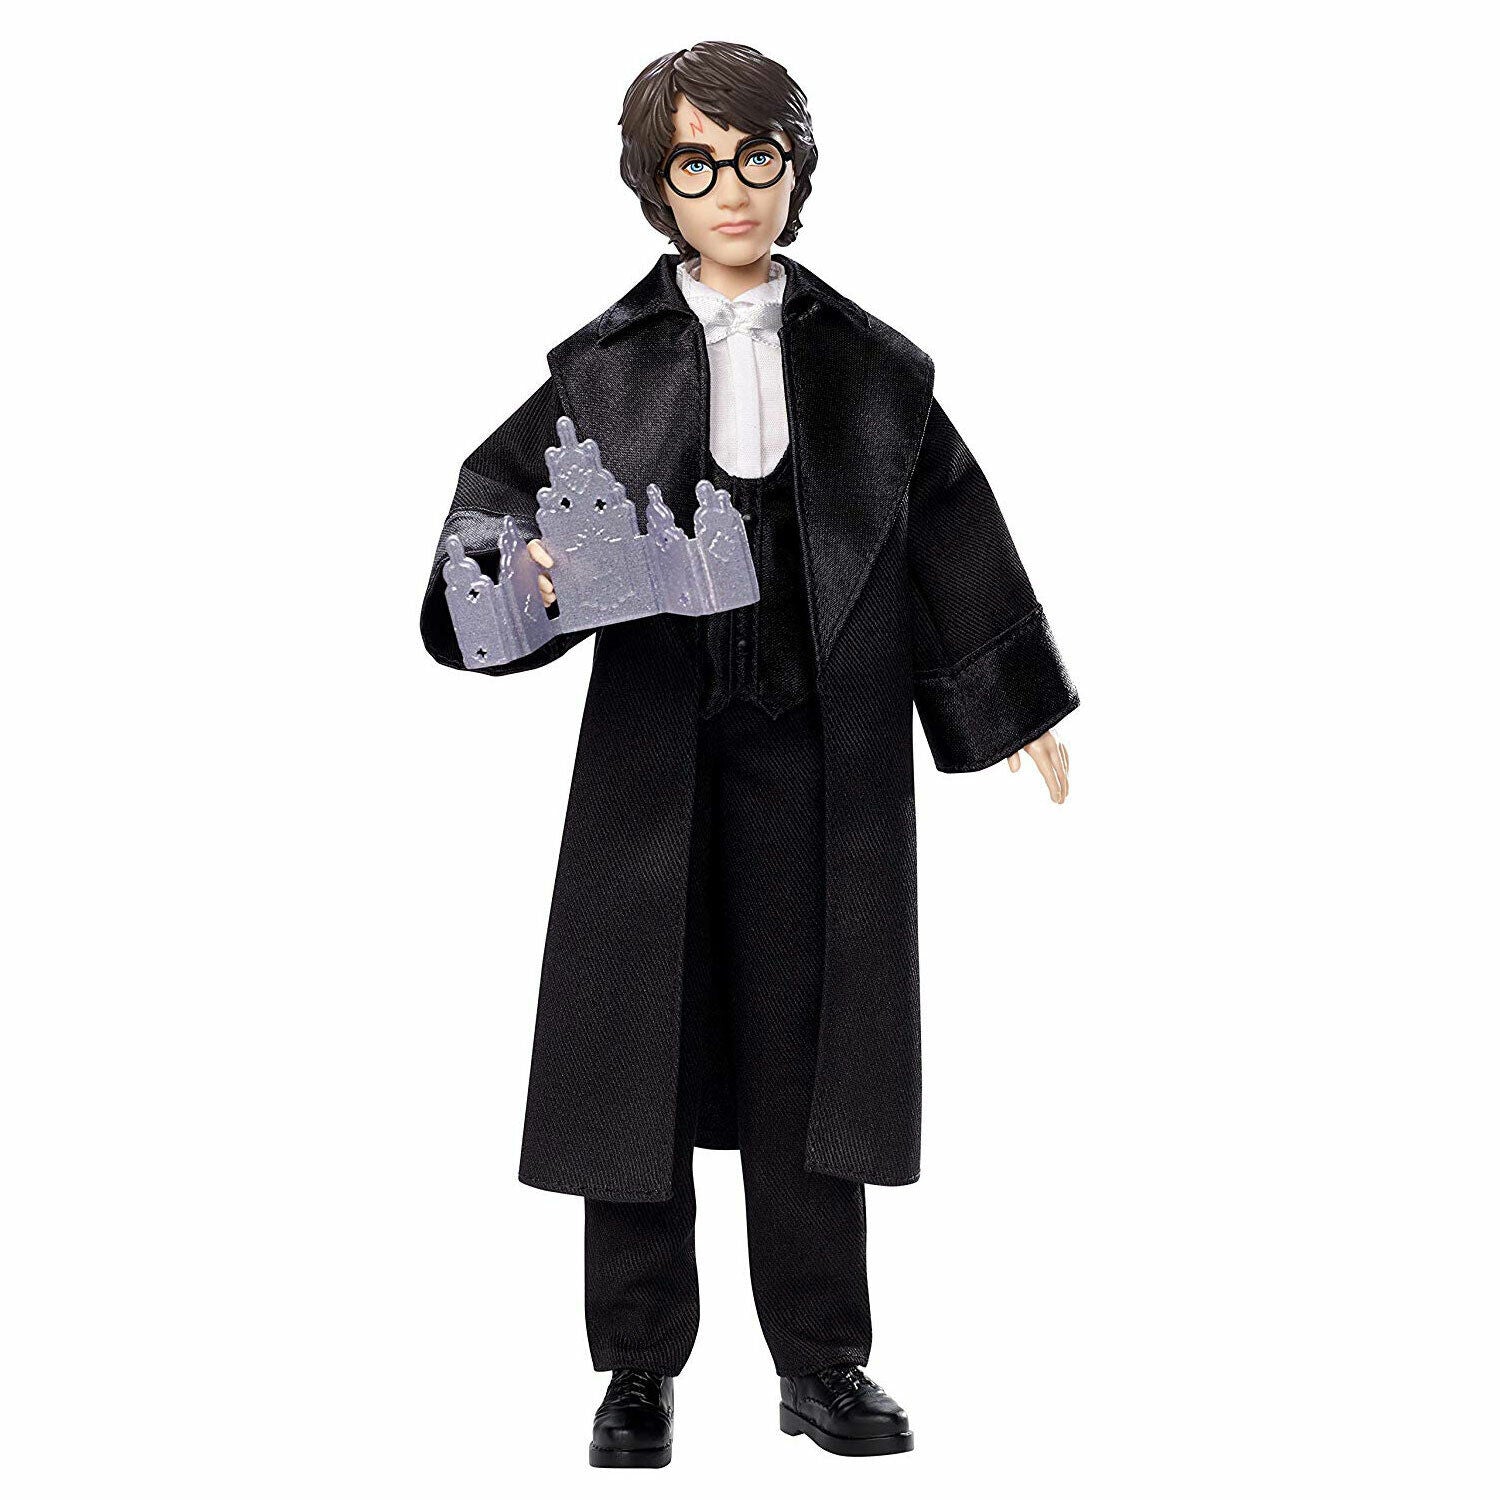 New Harry Potter Yule Ball Doll - Wizarding World Collectible